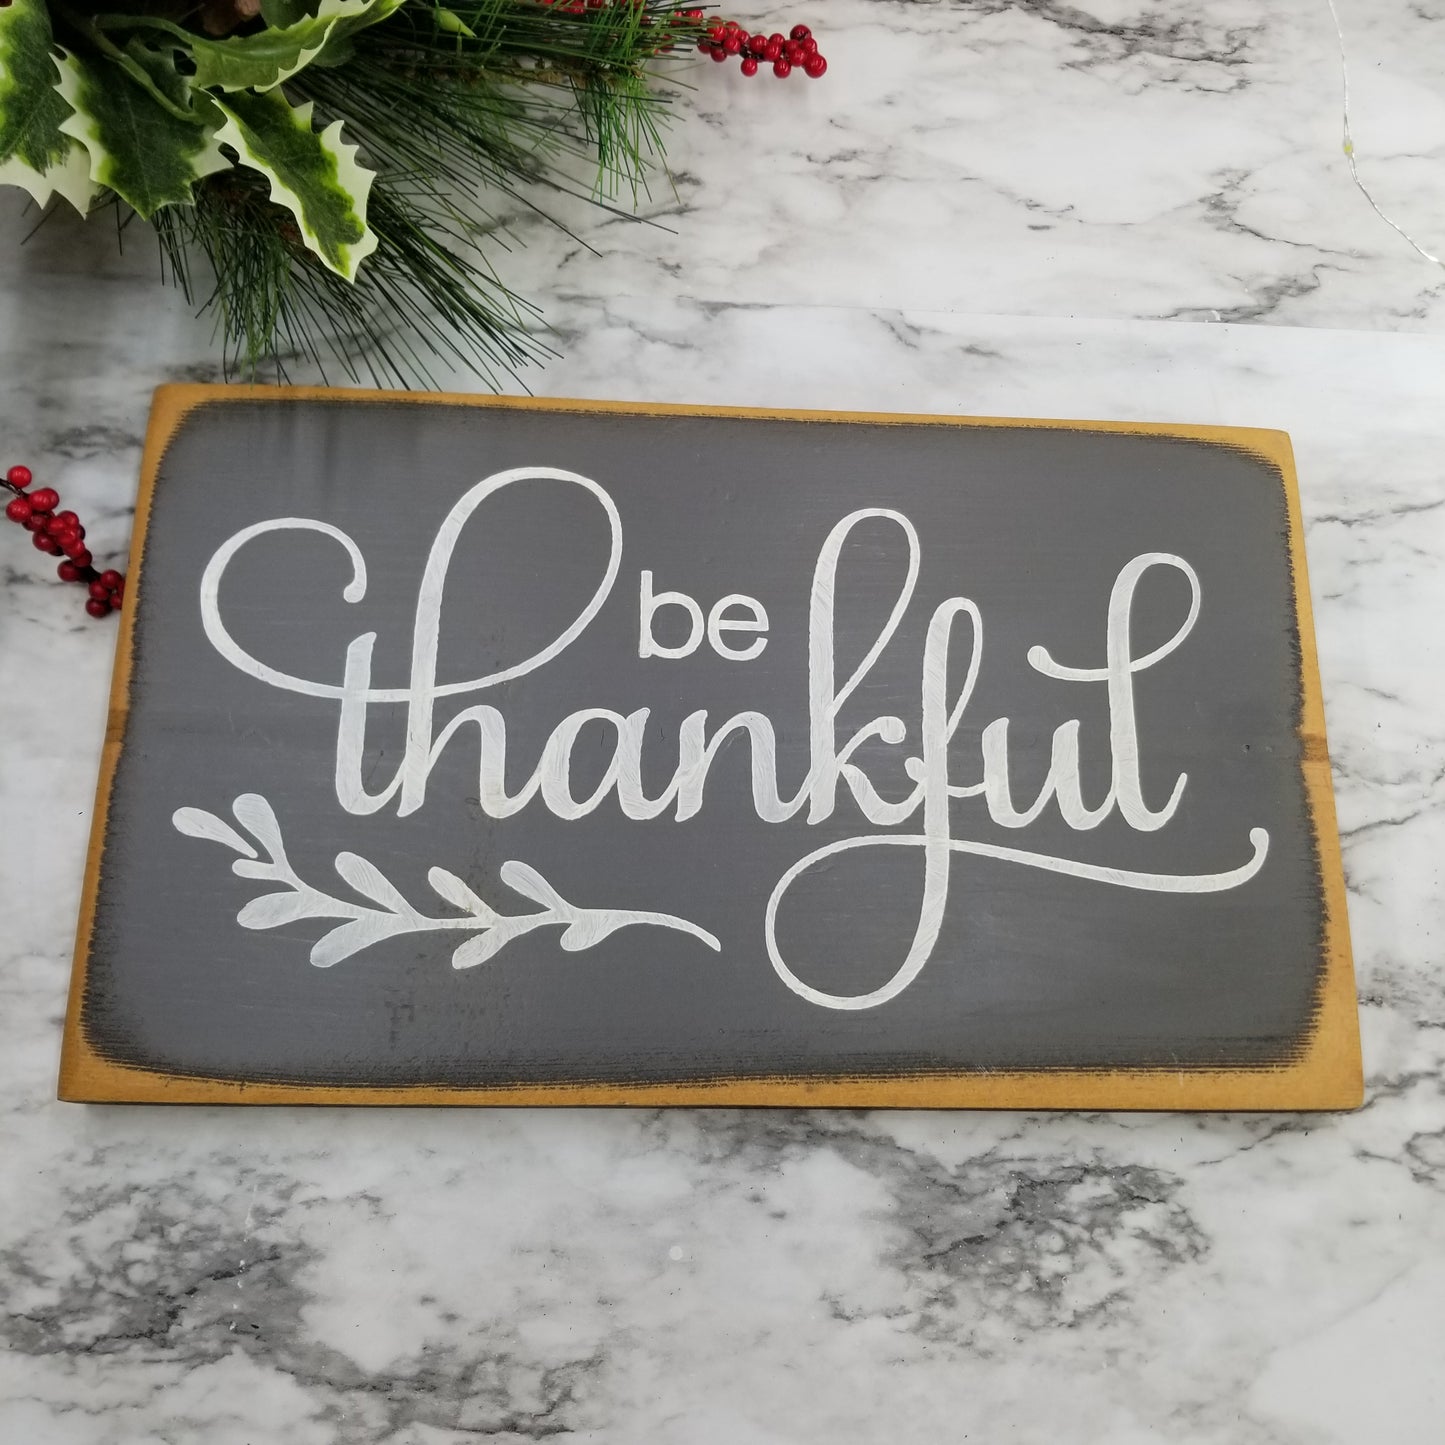 Be Thankful Wooden Sign